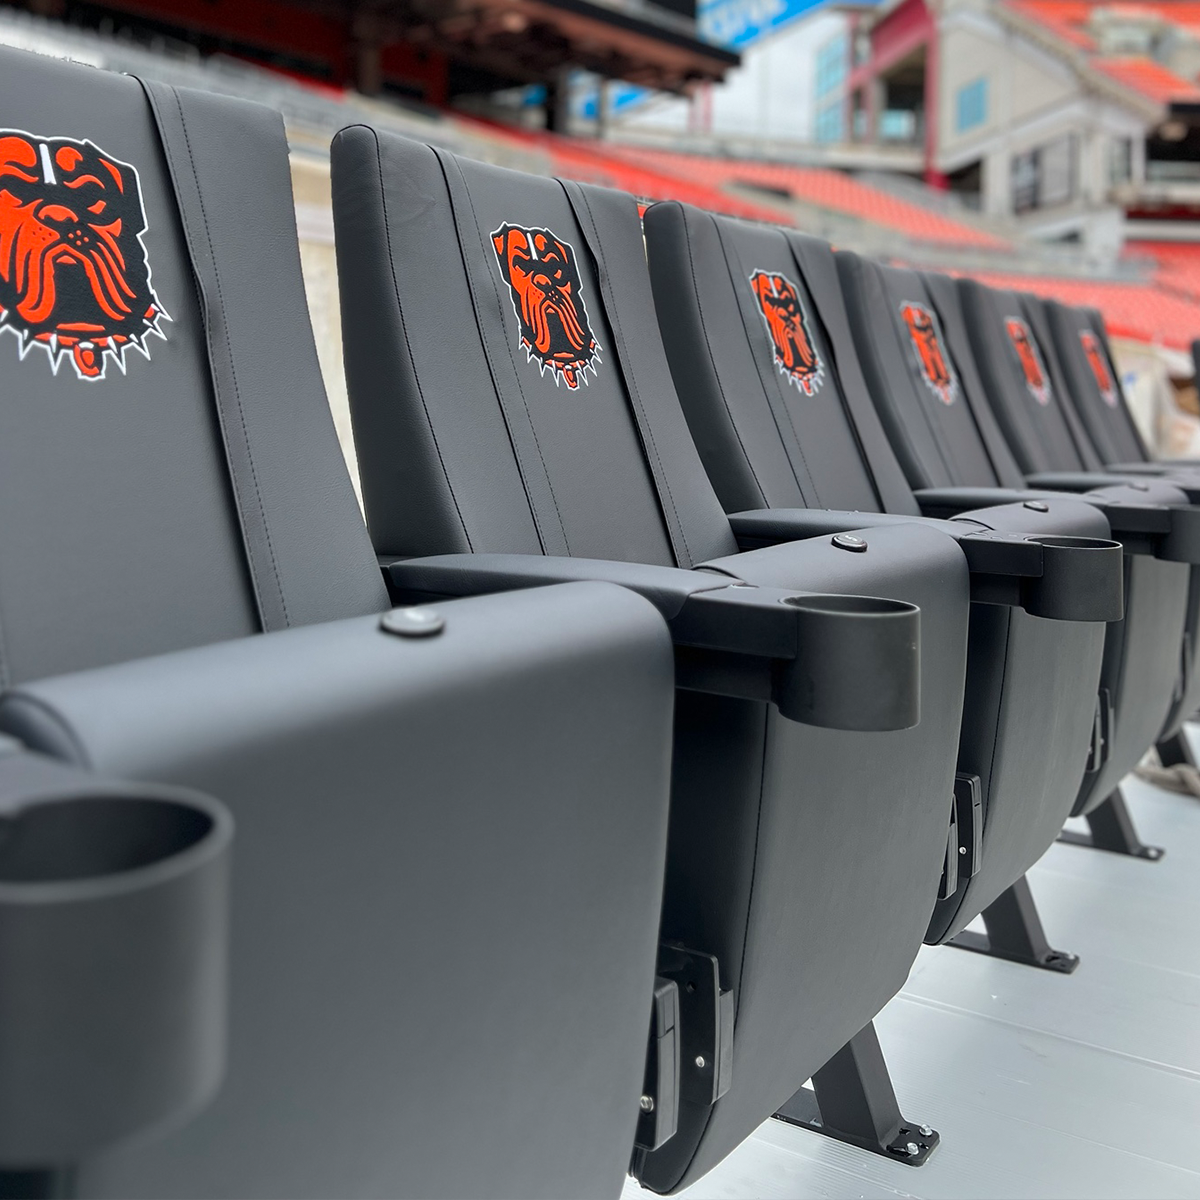 SuiteMax 3.5 VIP Seats with Miami Heat Secondary Logo